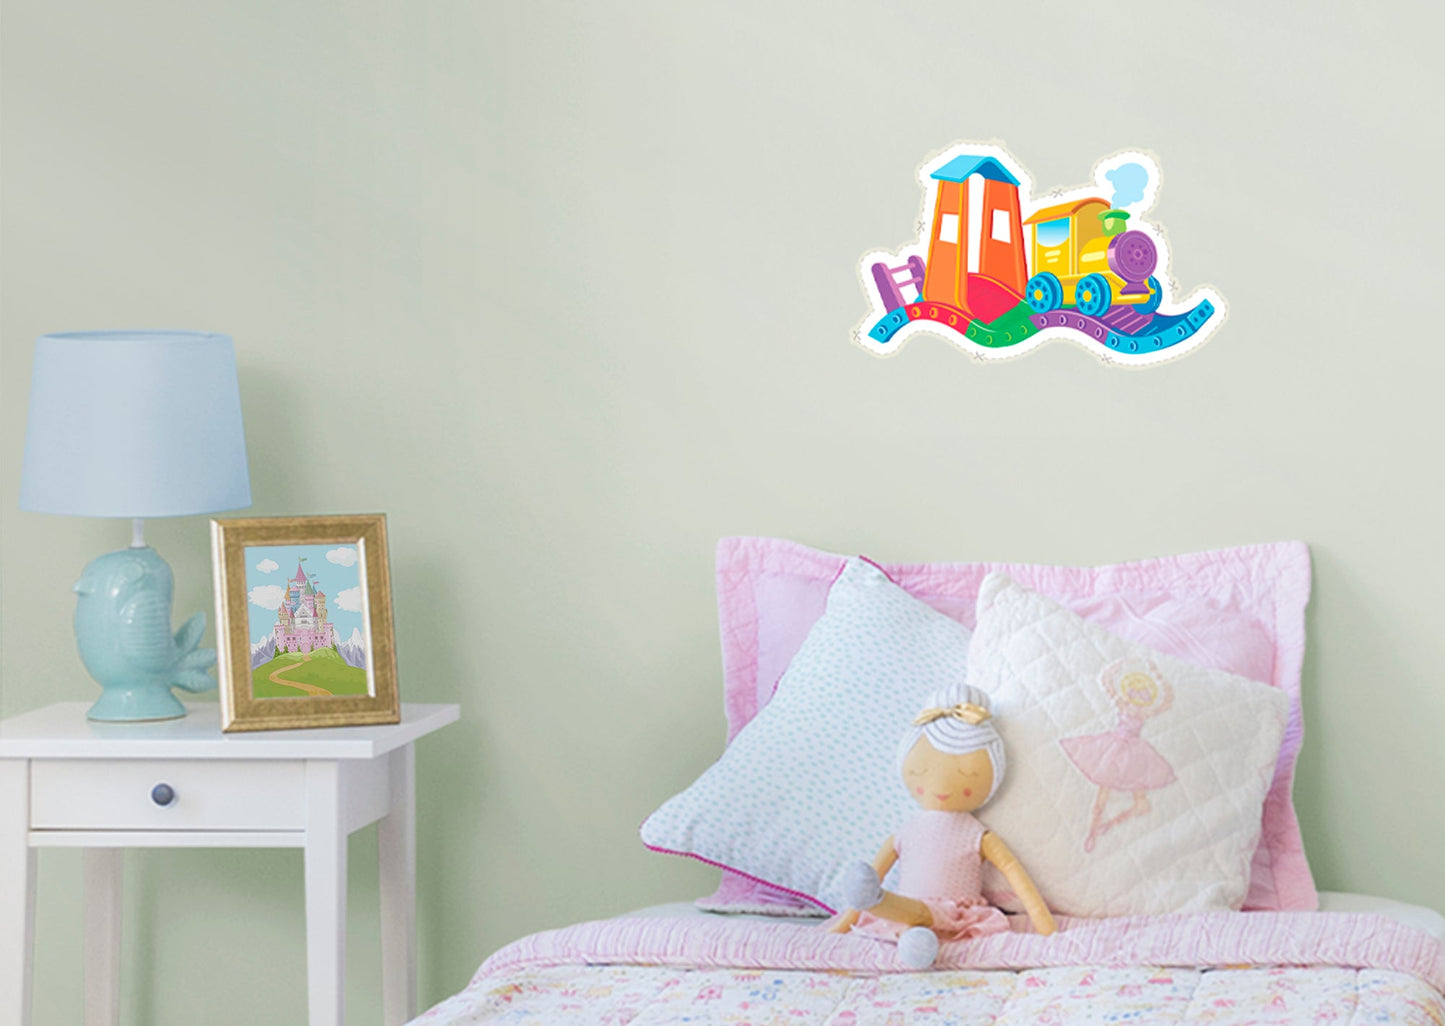 Nursery:  Colored Train Icon        -   Removable Wall   Adhesive Decal